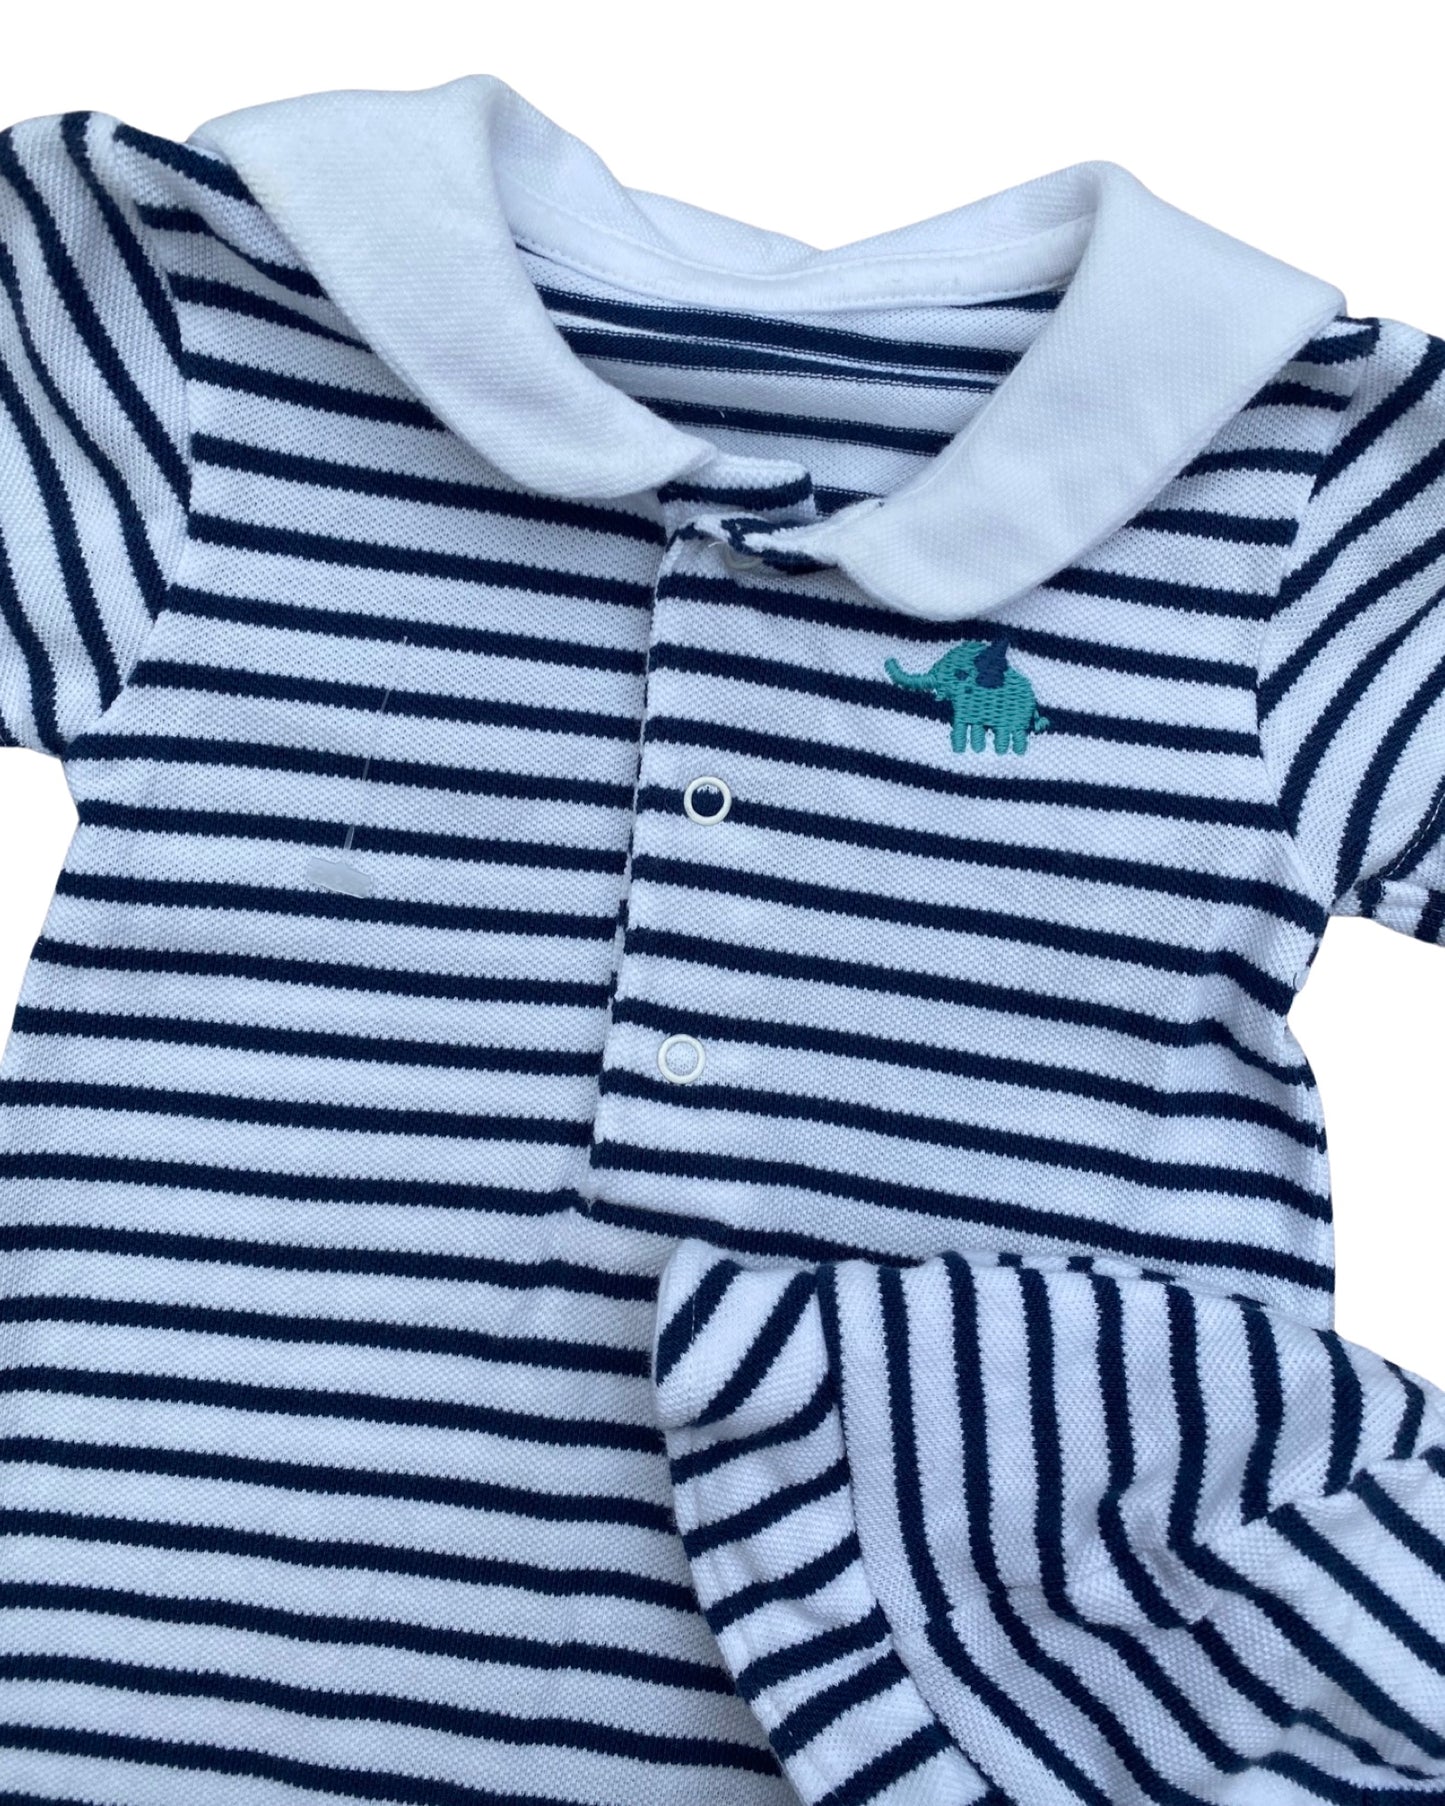 John Lewis sailor style striped short romper with matching hat (0-3mths)